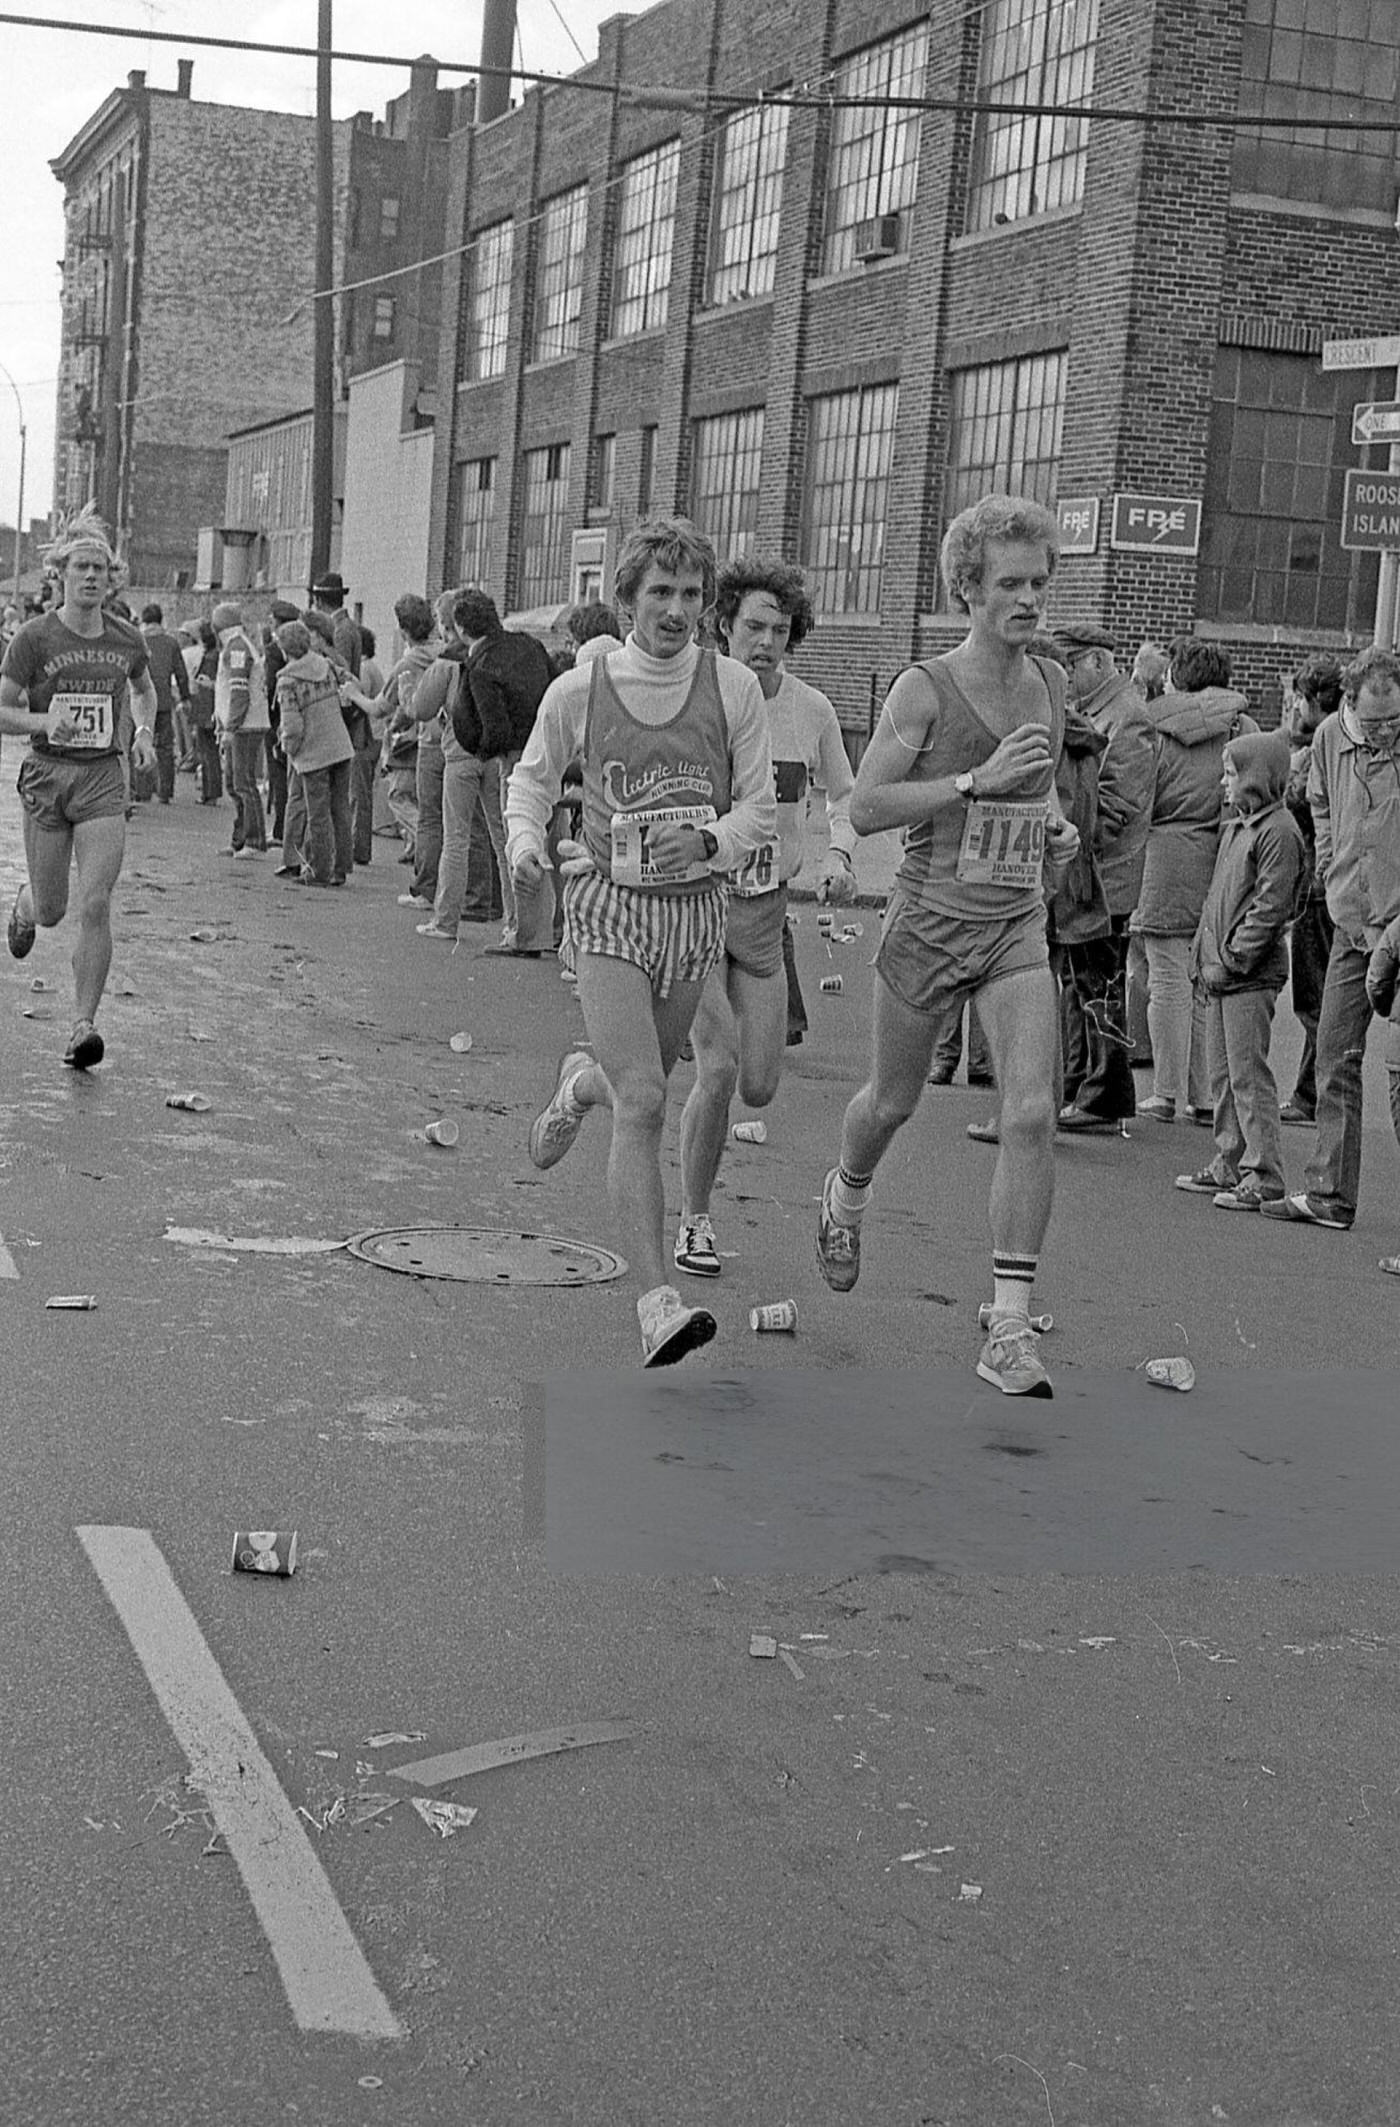 Runners Pass The 14-Mile Marker On Crescent Street During The New York City Marathon, Queens, 1980.